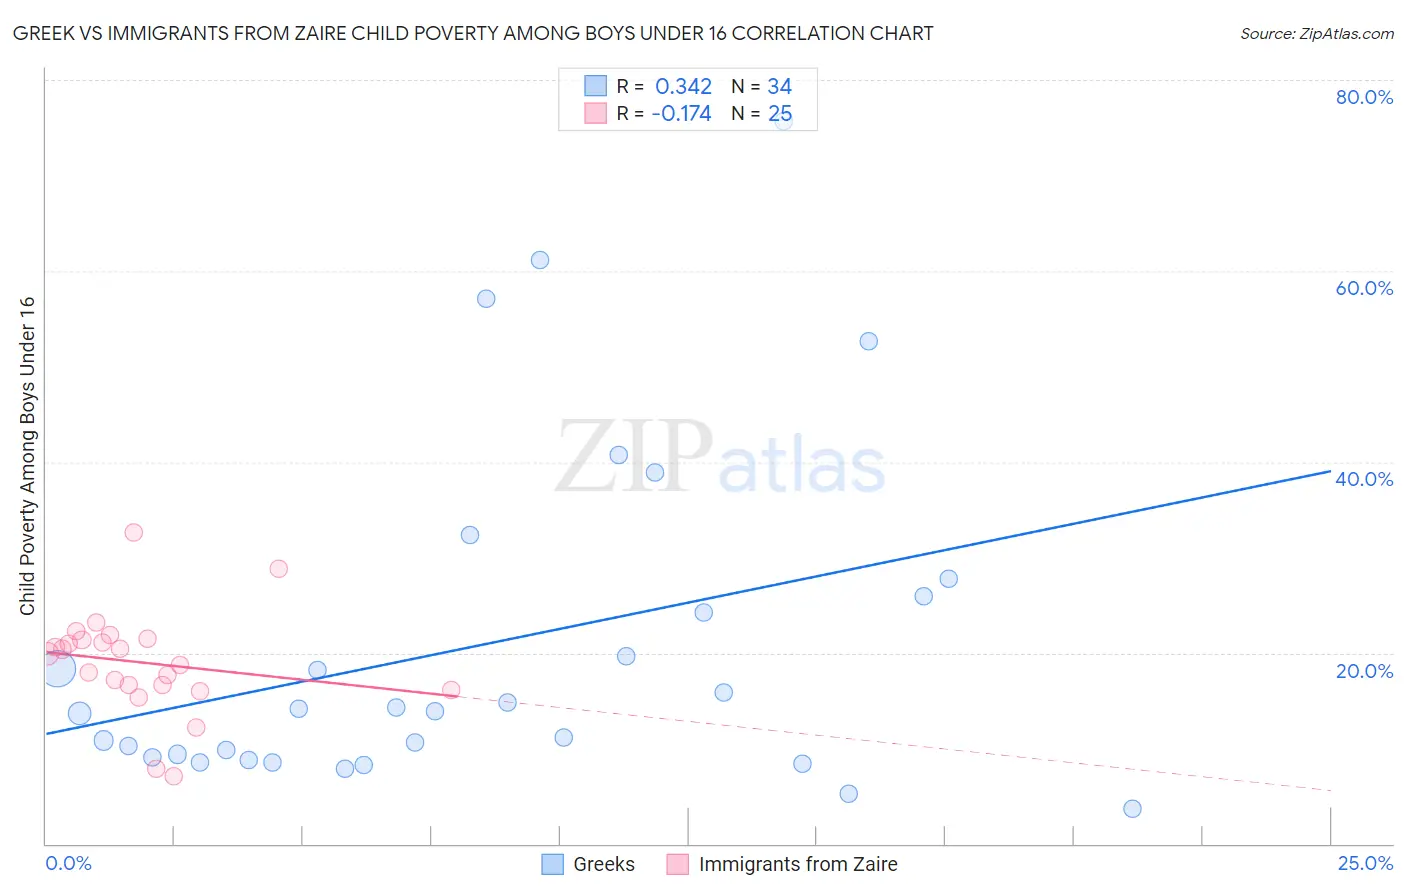 Greek vs Immigrants from Zaire Child Poverty Among Boys Under 16